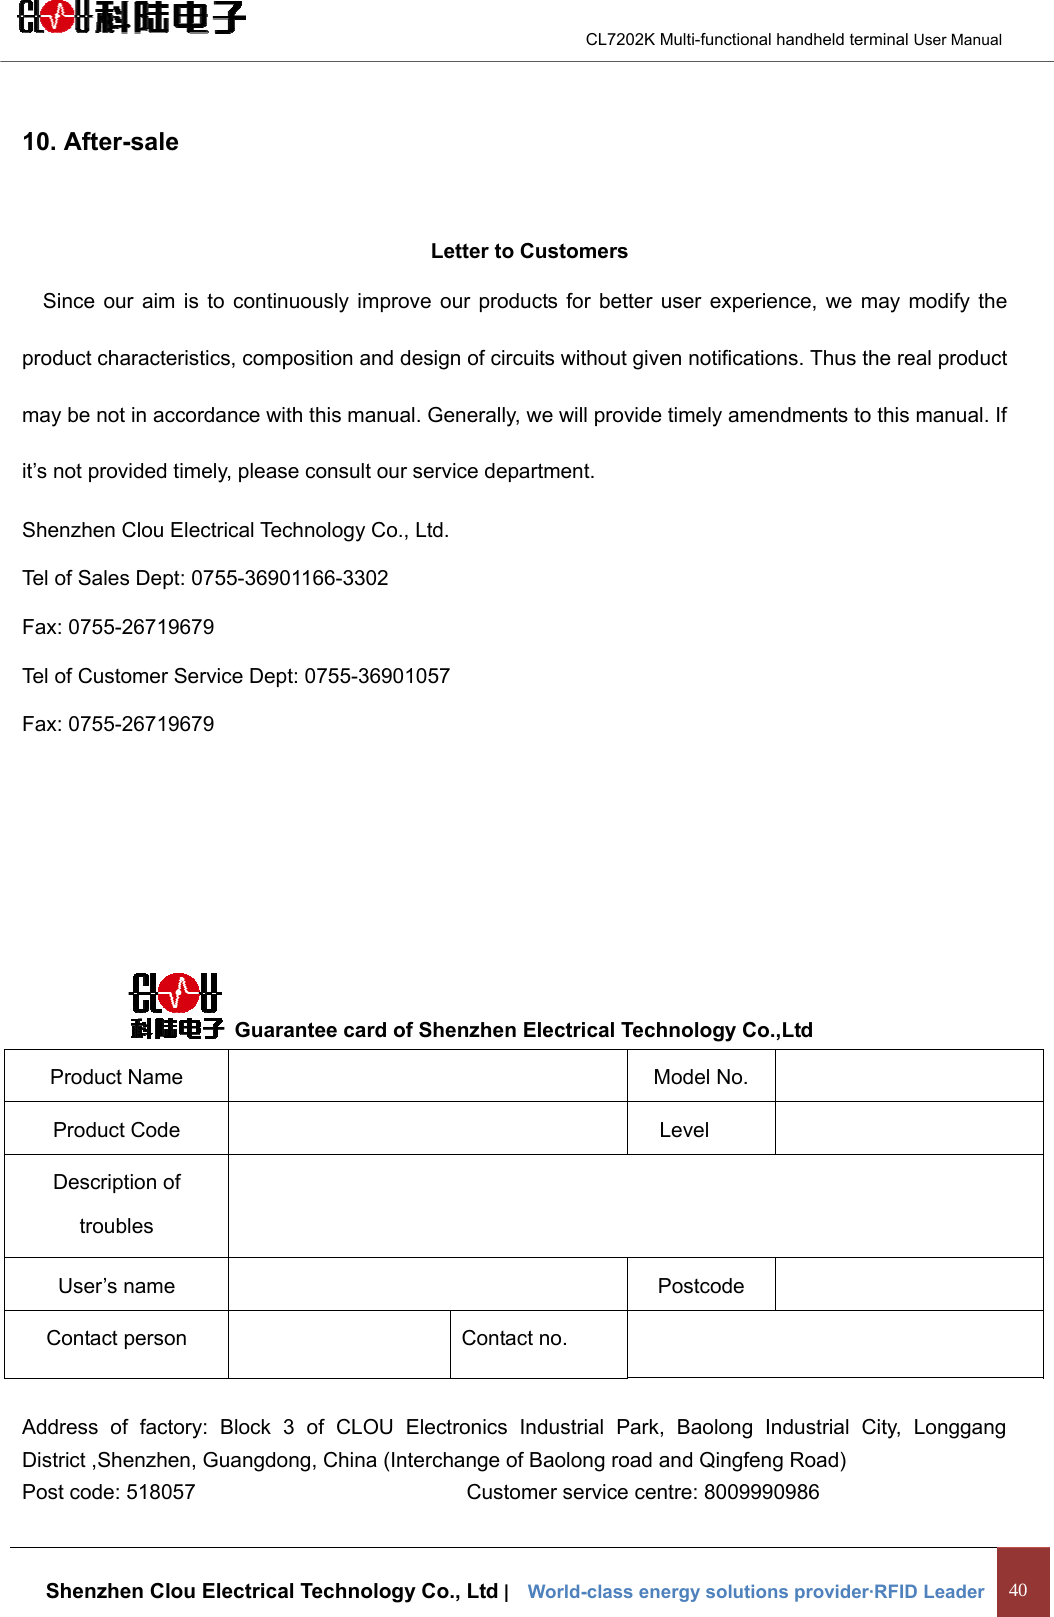                                        CL7202K Multi-functional handheld terminal User Manual   Shenzhen Clou Electrical Technology Co., Ltd |    World-class energy solutions provider·RFID Leader 40  10. After-sale  Letter to Customers Since our aim is to continuously improve our products for better user experience, we may modify the product characteristics, composition and design of circuits without given notifications. Thus the real product may be not in accordance with this manual. Generally, we will provide timely amendments to this manual. If it’s not provided timely, please consult our service department. Shenzhen Clou Electrical Technology Co., Ltd. Tel of Sales Dept: 0755-36901166-3302 Fax: 0755-26719679 Tel of Customer Service Dept: 0755-36901057 Fax: 0755-26719679          Guarantee card of Shenzhen Electrical Technology Co.,Ltd Product Name    Model No.   Product Code    Level   Description of troubles   User’s name    Postcode   Contact person    Contact no.    Address of factory: Block 3 of CLOU Electronics Industrial Park, Baolong Industrial City, Longgang District ,Shenzhen, Guangdong, China (Interchange of Baolong road and Qingfeng Road) Post code: 518057                          Customer service centre: 8009990986 